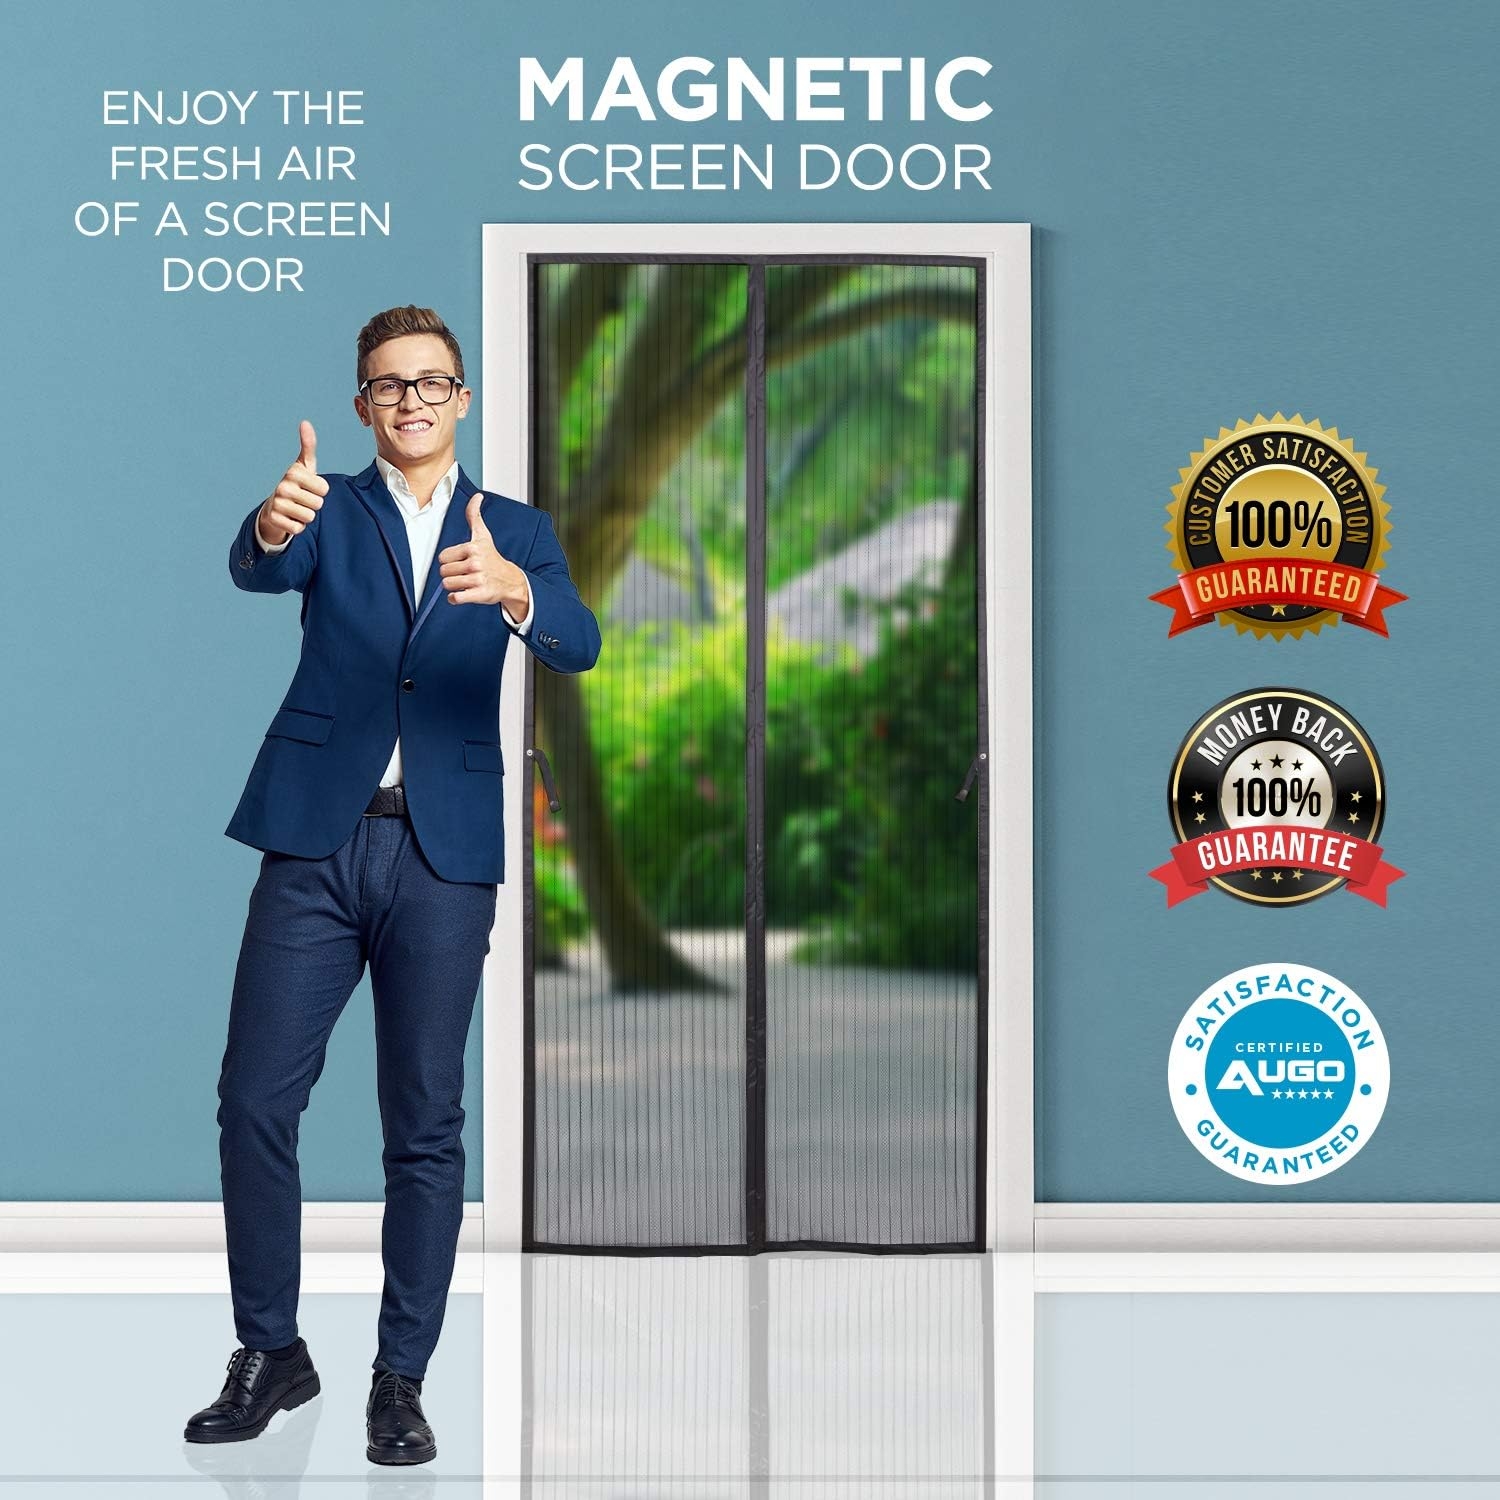 Magnetic Screen Door - Self Sealing, Heavy Duty, Hands Free Mesh Partition Keeps Bugs Out - Pet and Kid Friendly - Patent Pending Keep Open Feature - 38" x 83" - by Augo